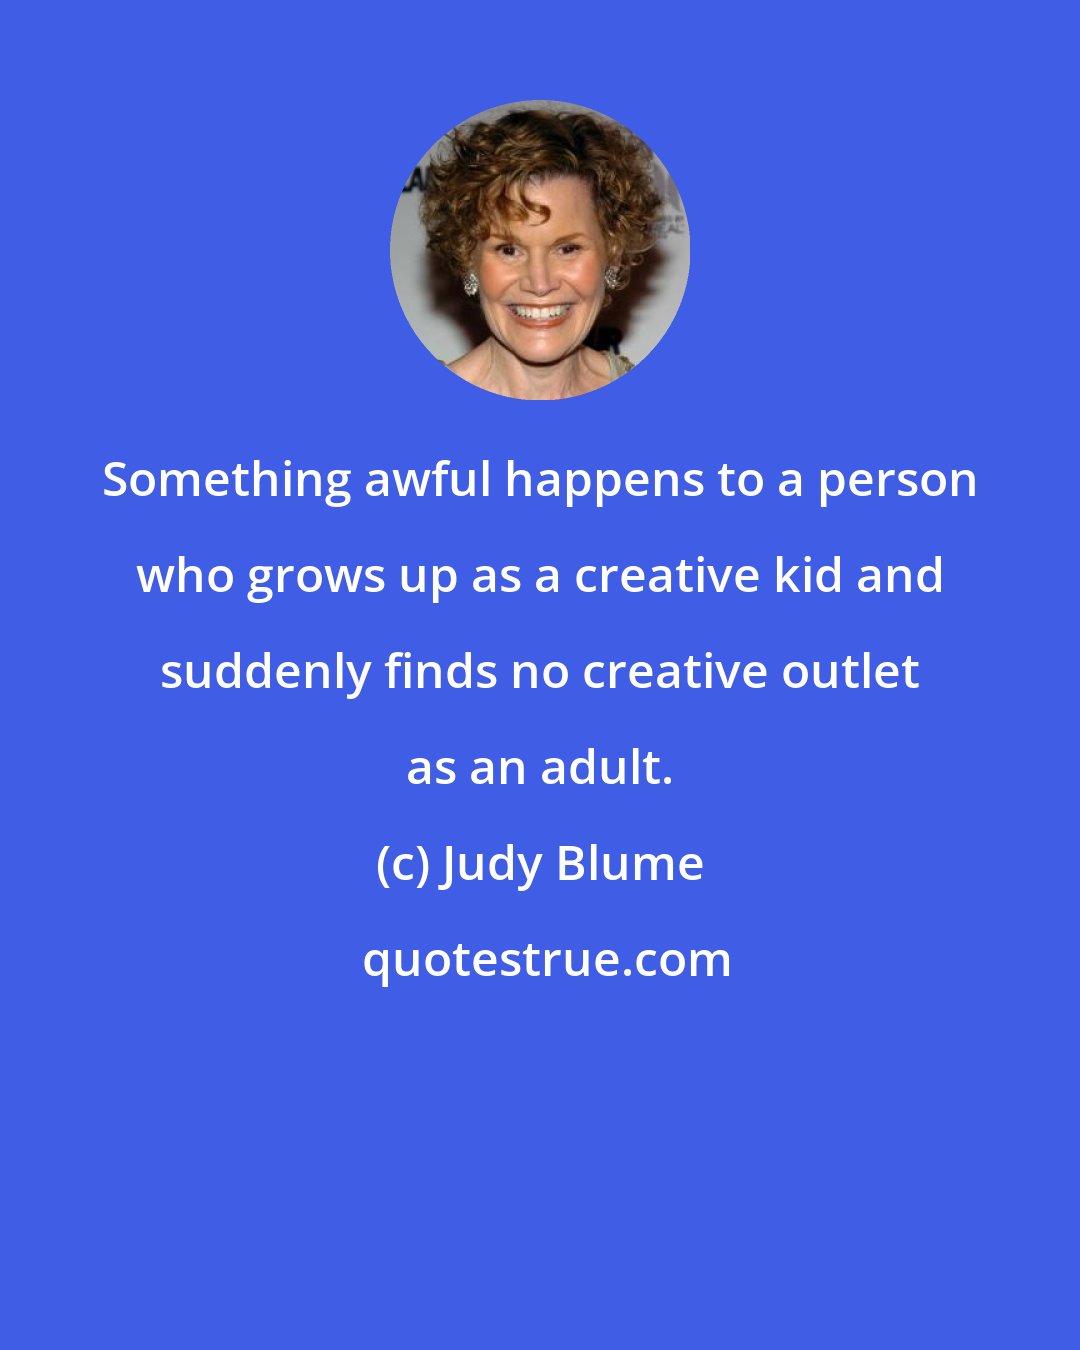 Judy Blume: Something awful happens to a person who grows up as a creative kid and suddenly finds no creative outlet as an adult.